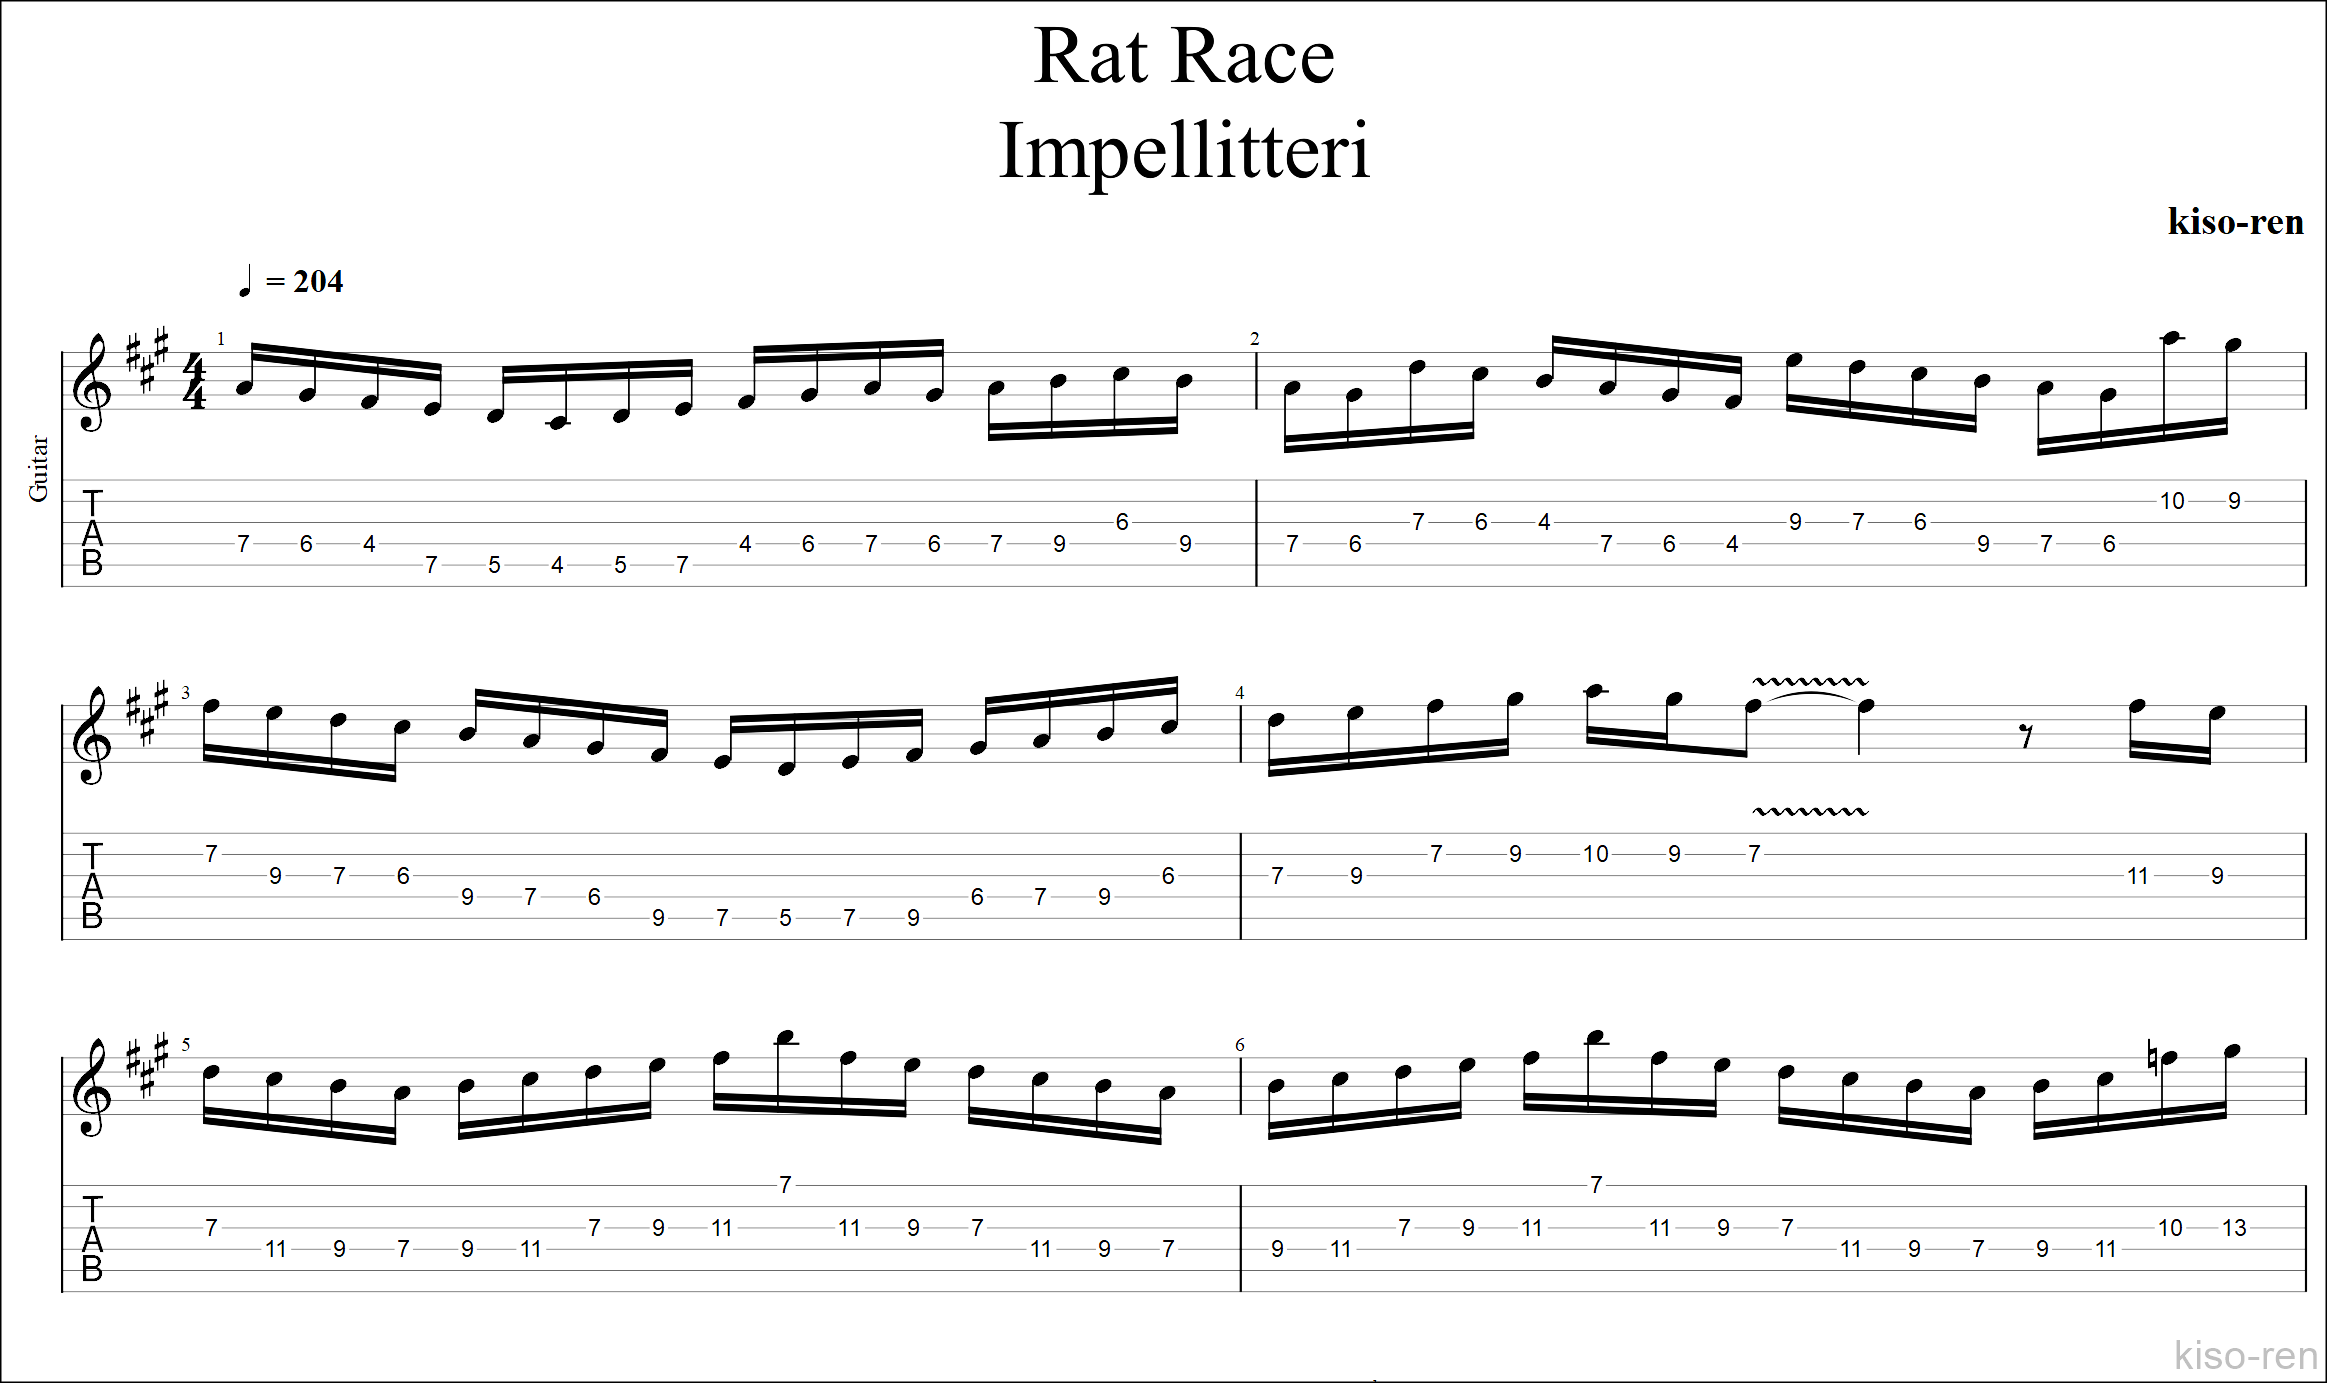 【Part TAB】Rat Race / IMPELLITTERIのギターソロタブ 速弾きピッキング練習